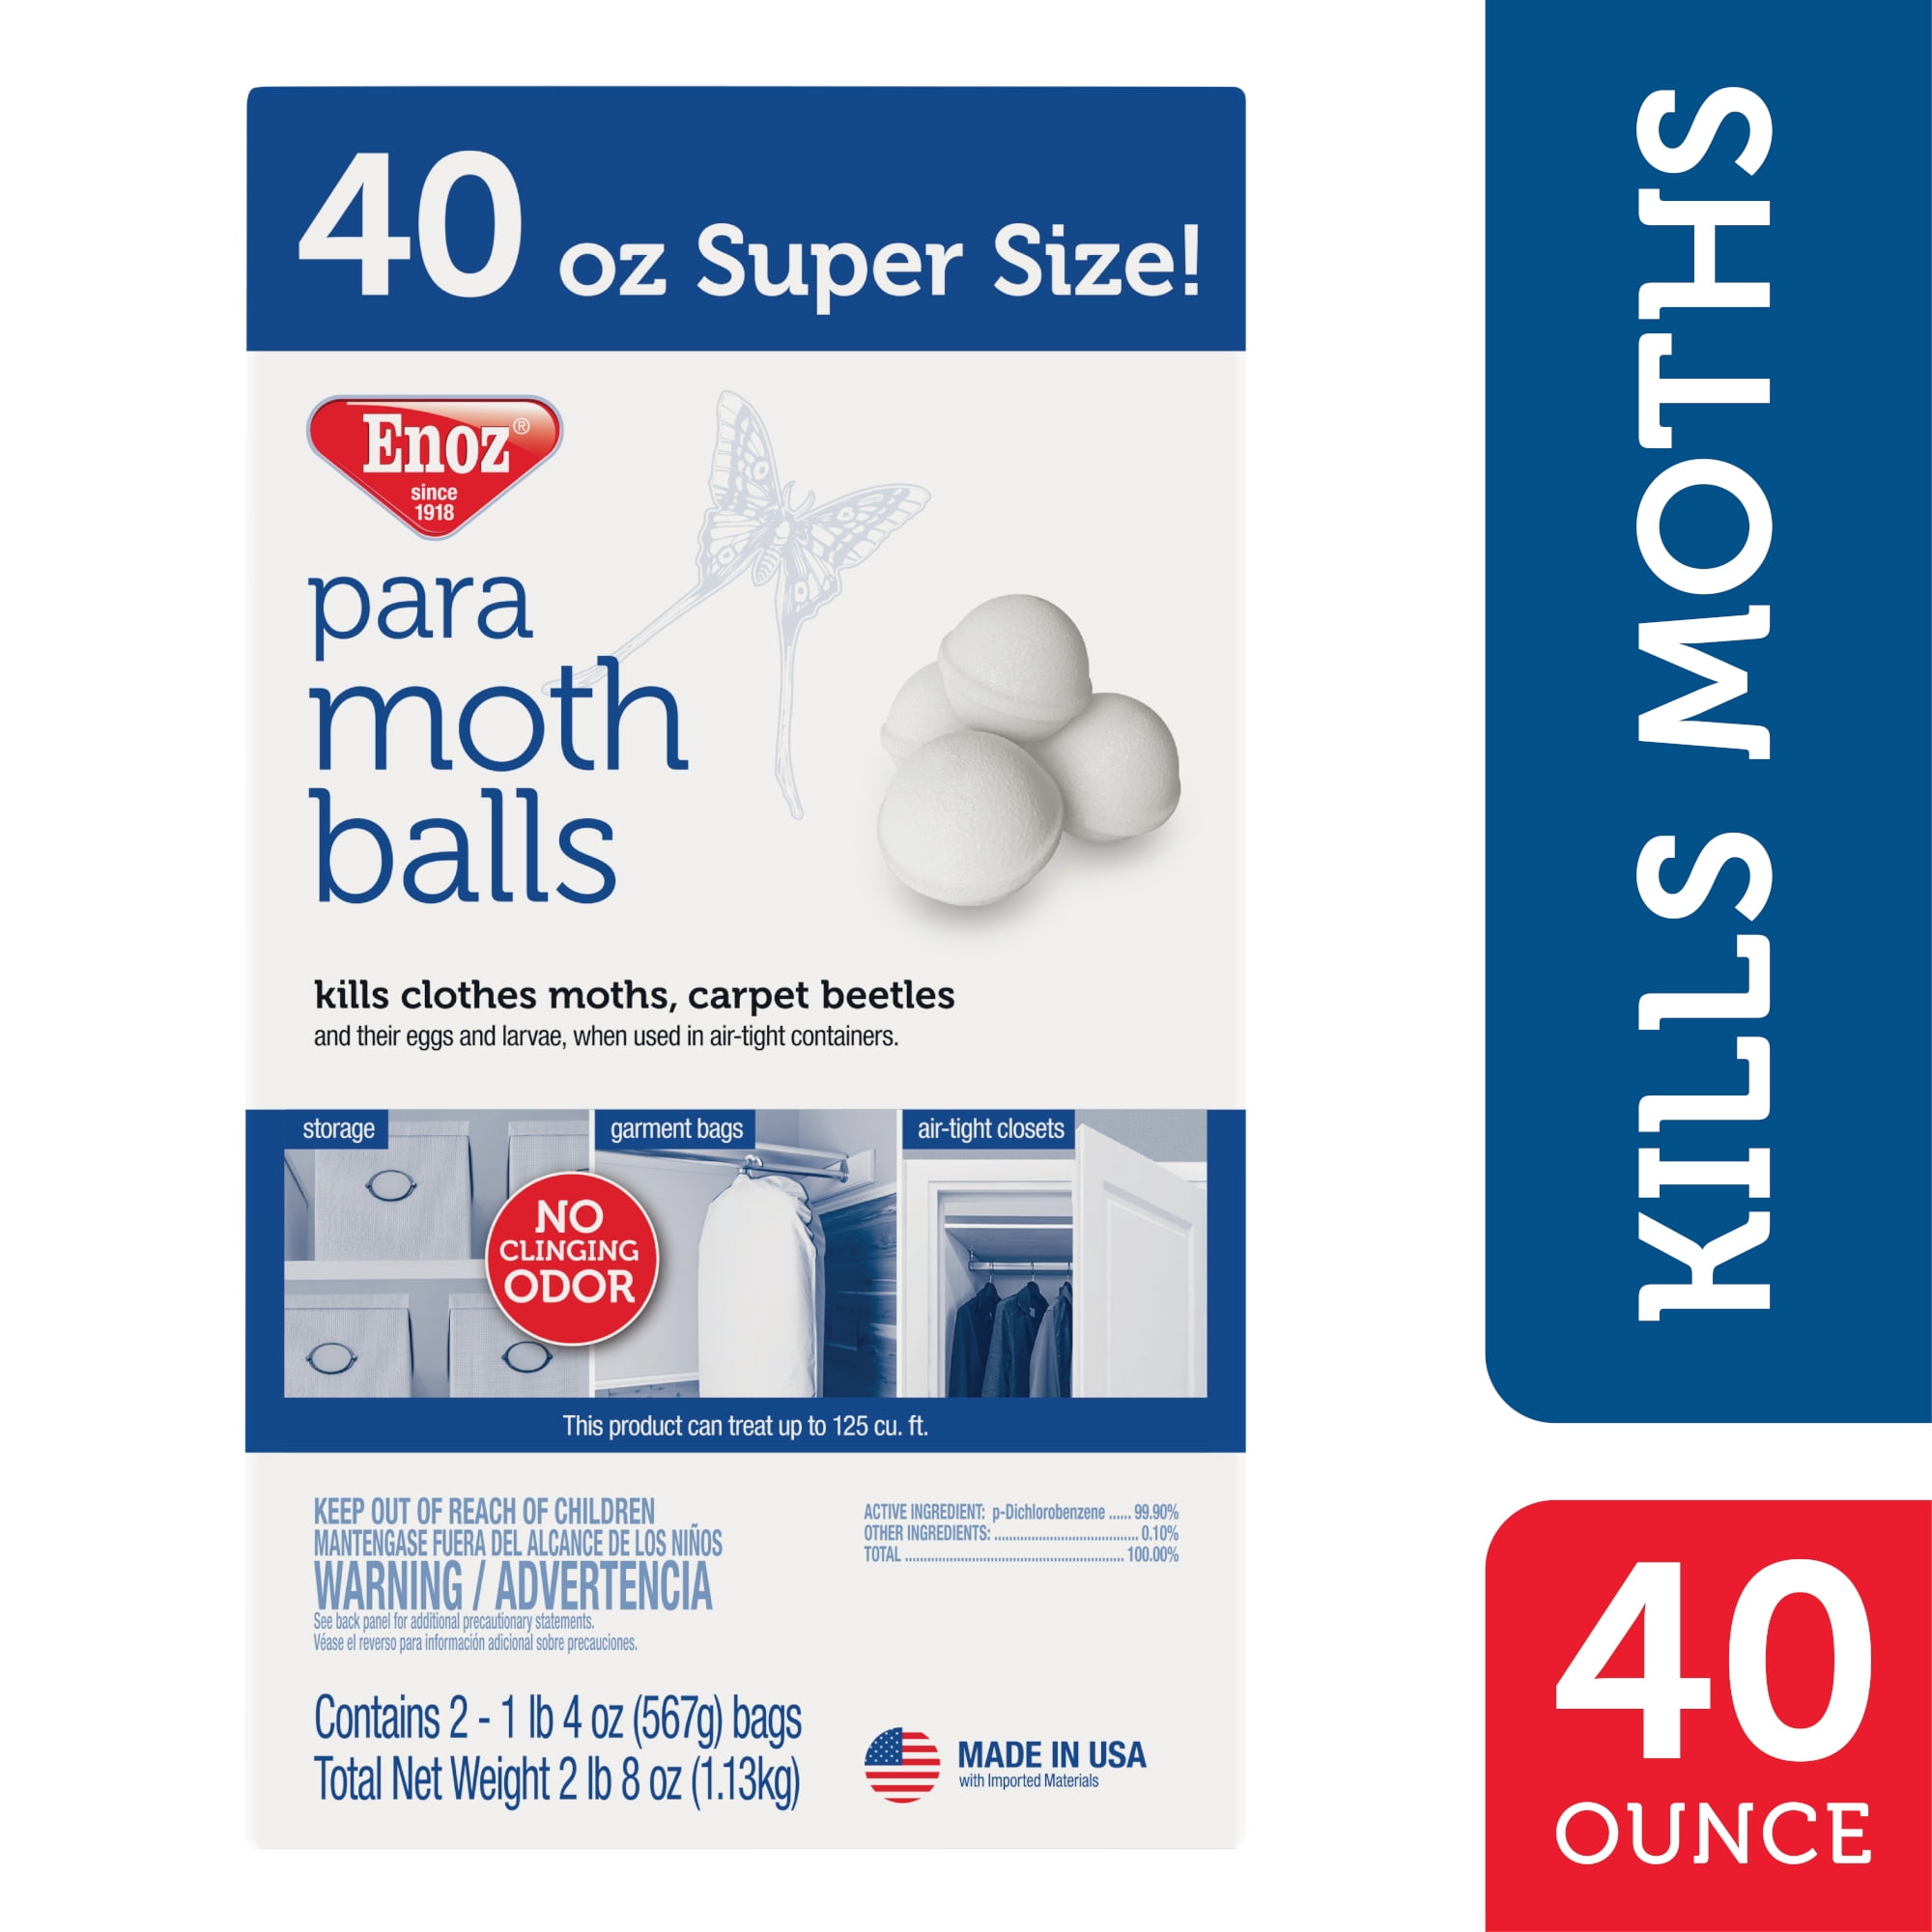 Enoz Moth Balls 4oz, 6-packages with No Clinging Odor- Protects Against Clothes Moths, Carpet Beetles, and Their Eggs and Larvae, Moth Killer Use for